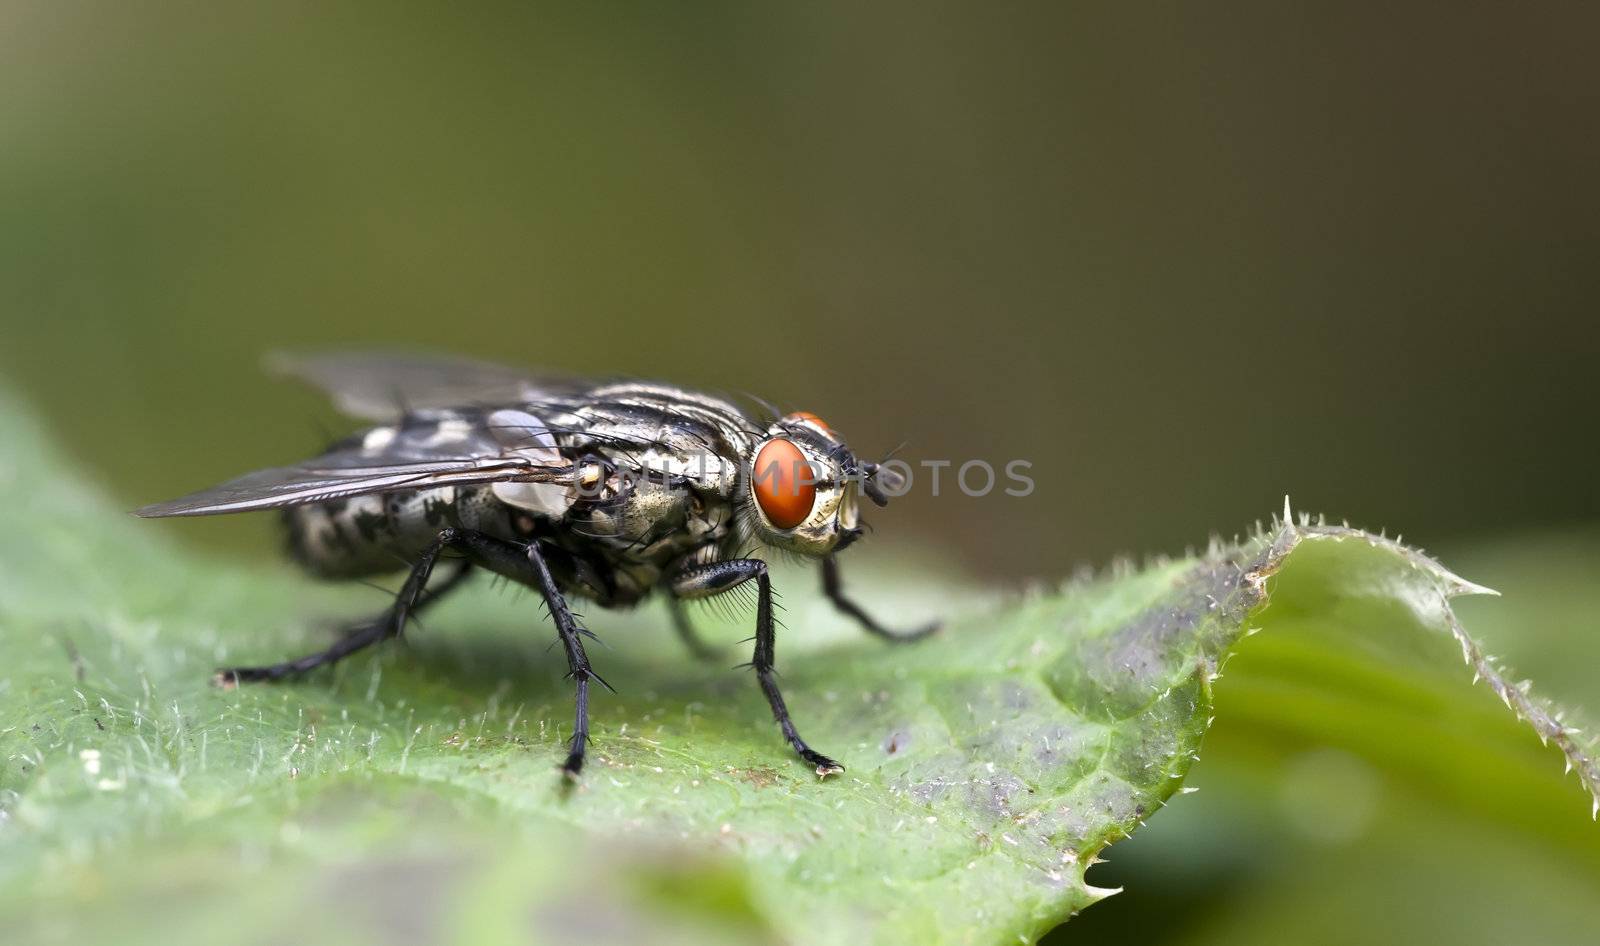 An image of a detailed nice fly macro